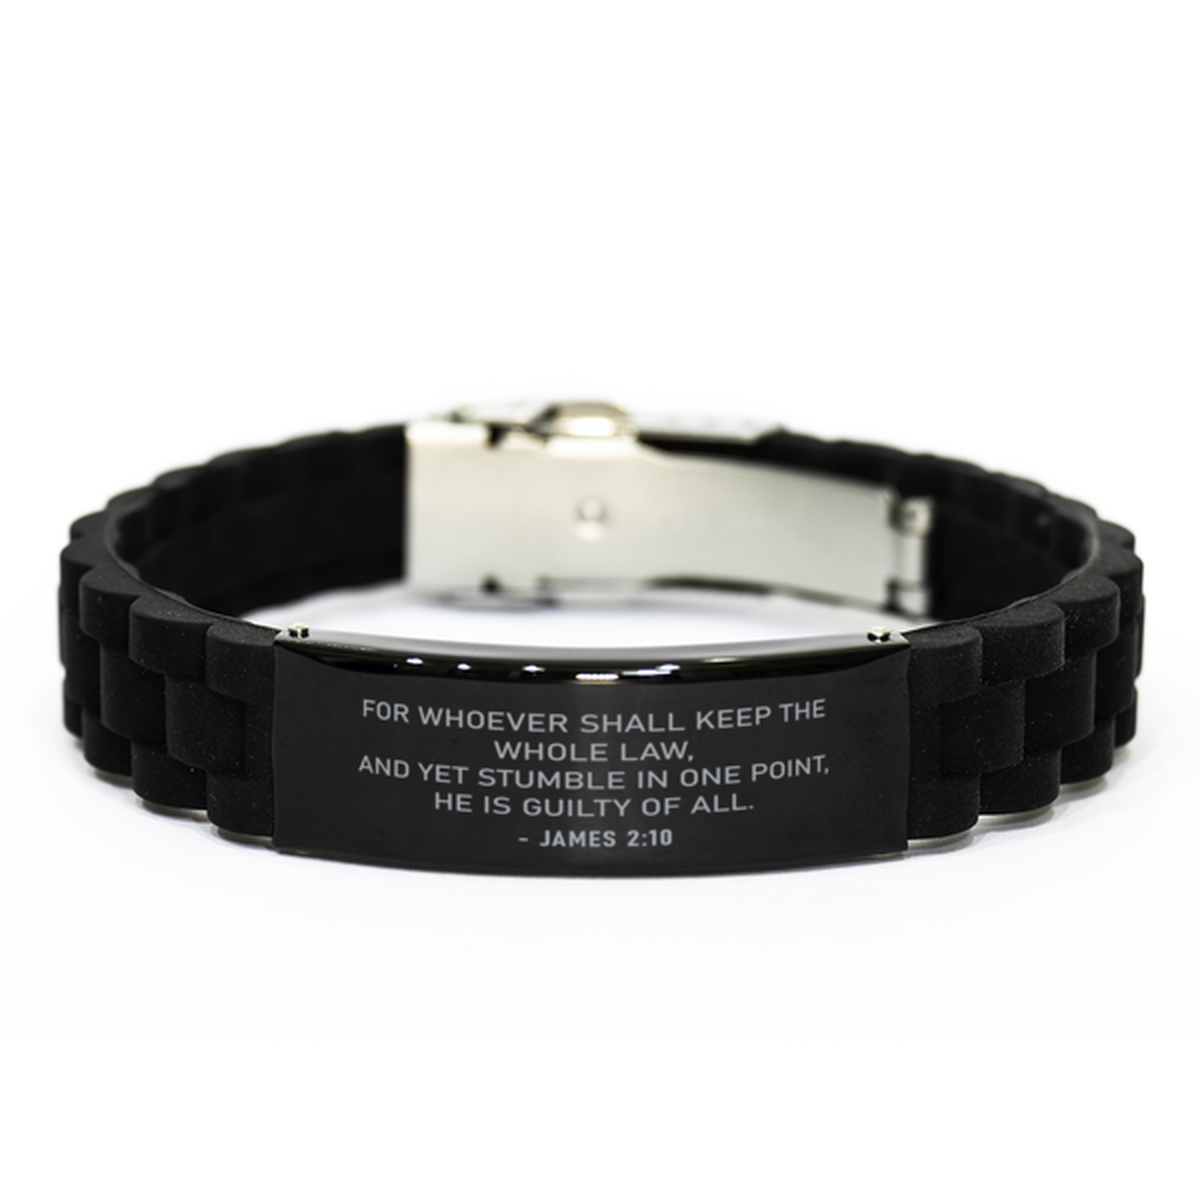 Bible Verse Black Bracelet,, James 2:10 For Whoever Shall Keep The Whole Law, And Yet, Inspirational Christian Gifts For Men Women